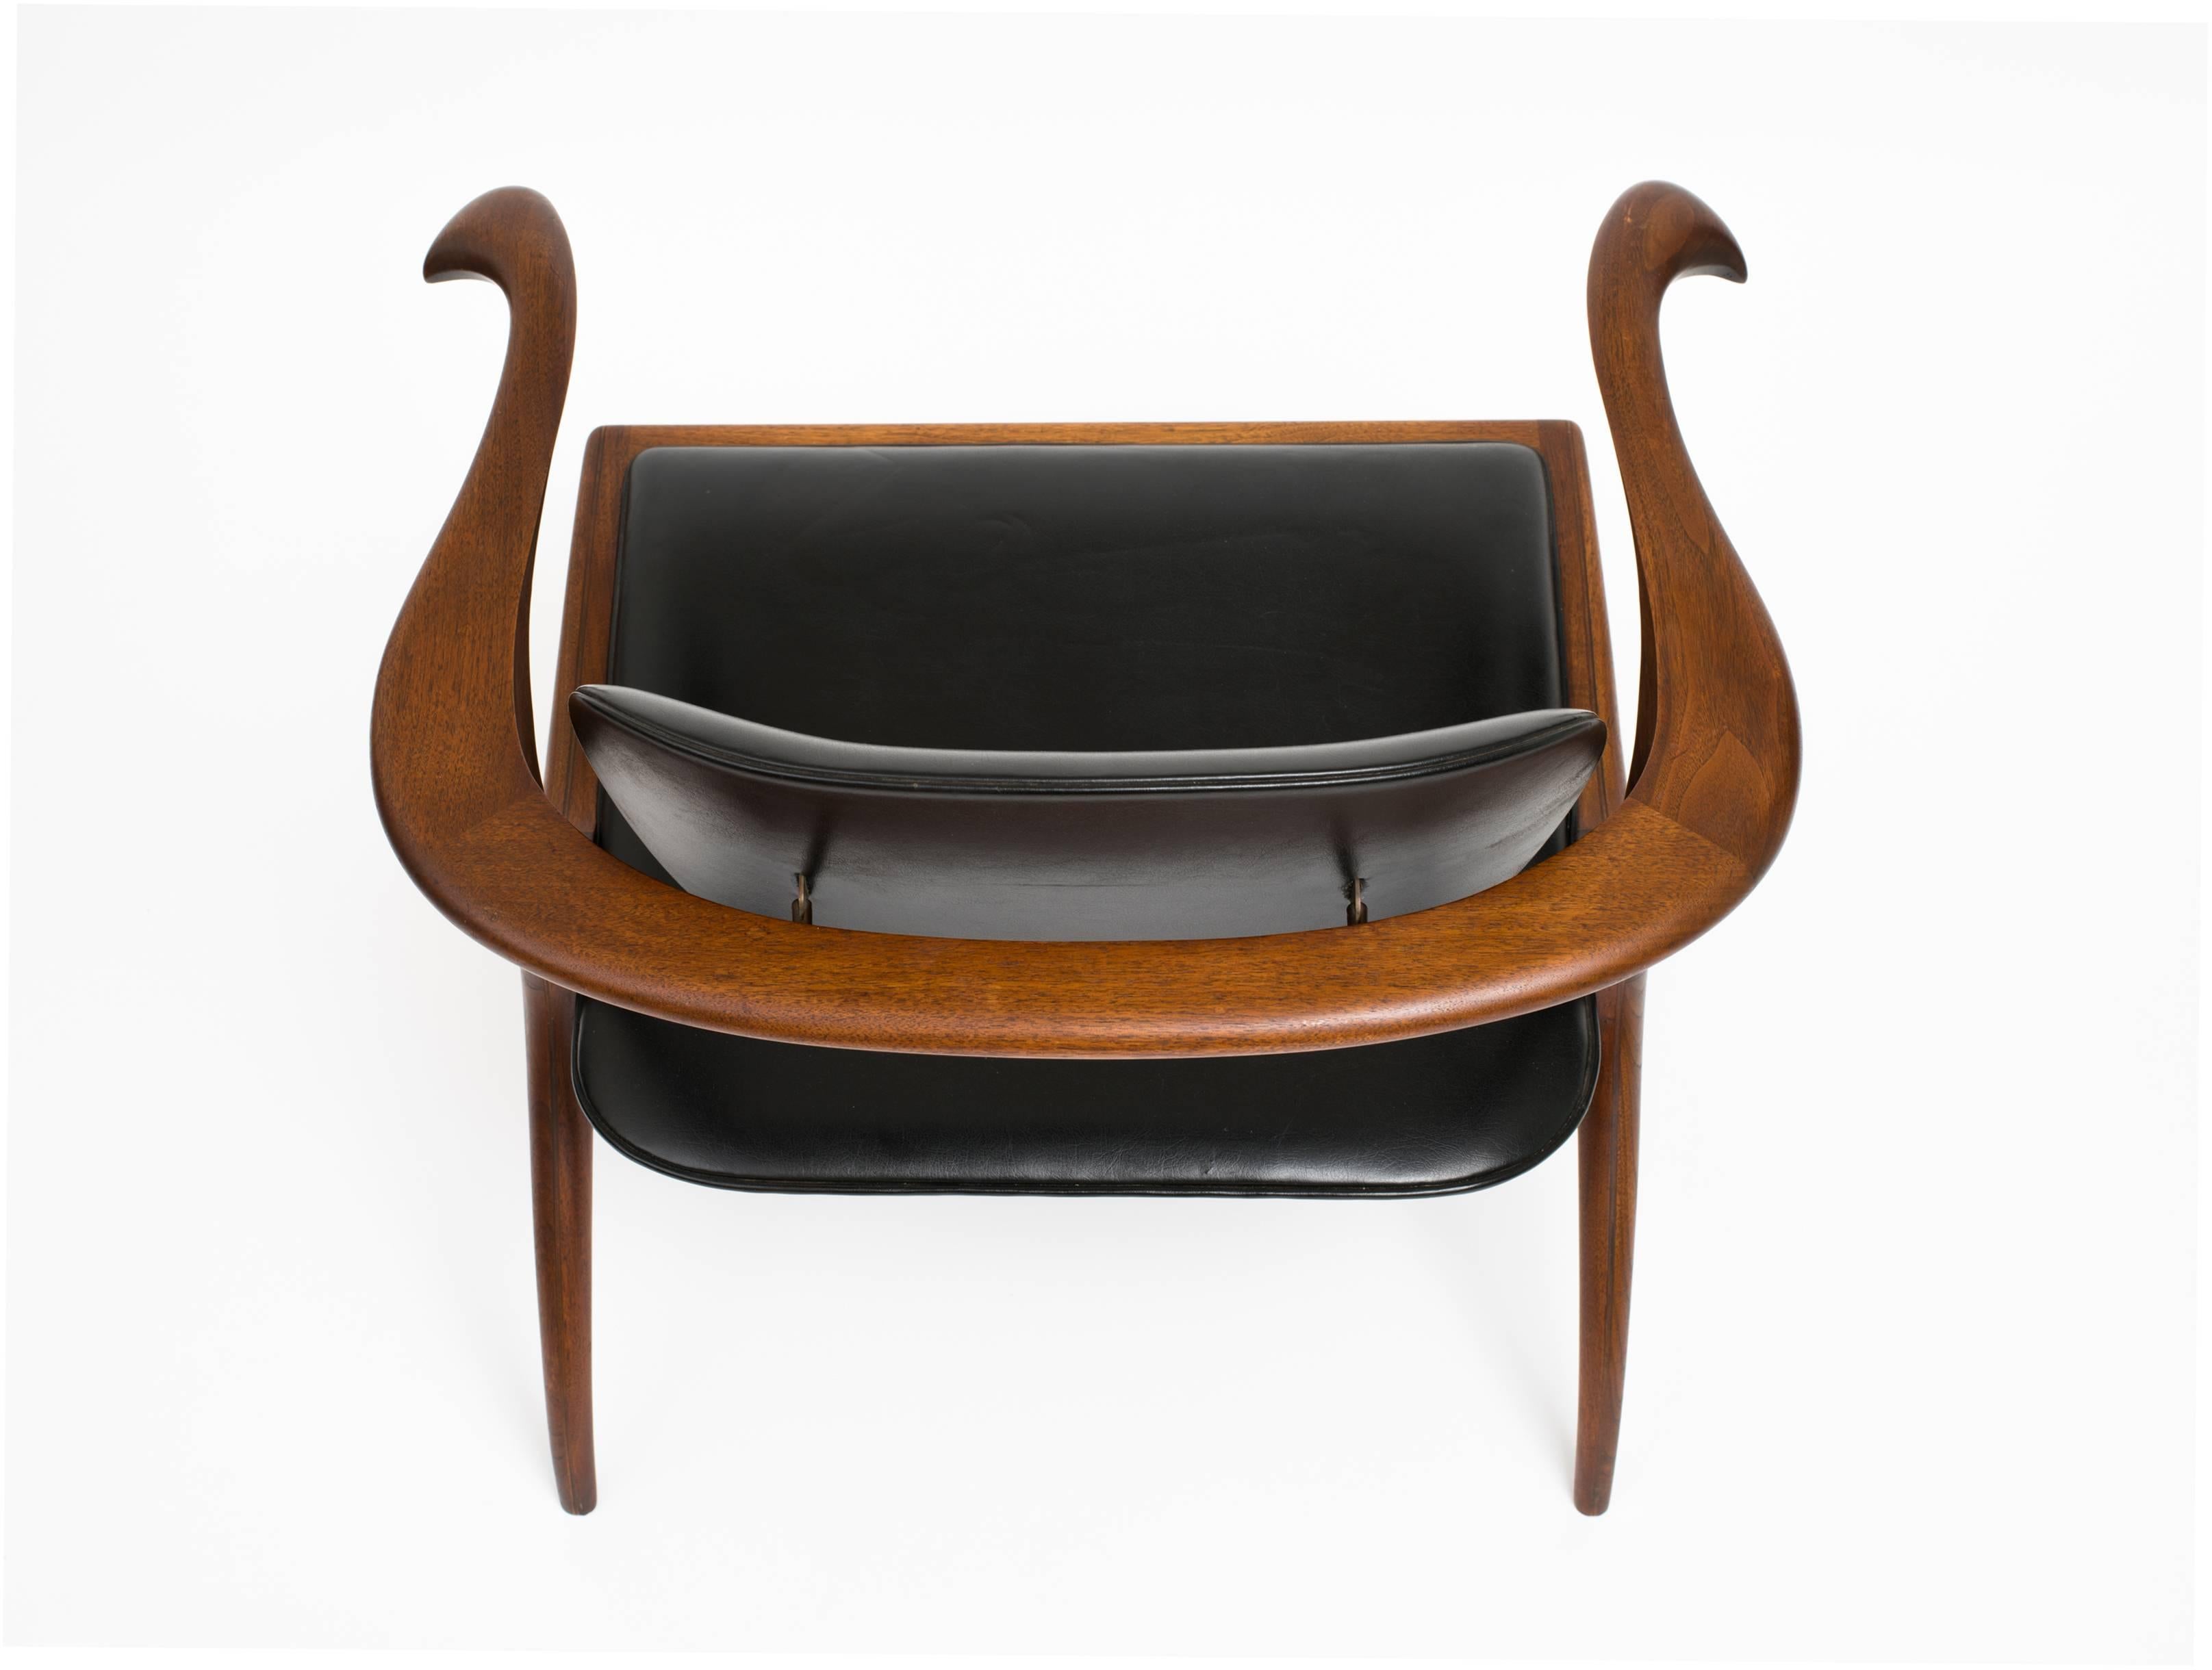 American Craftsman Early and Rare Evert Sodergren Sculptured Chair, circa 1955 For Sale